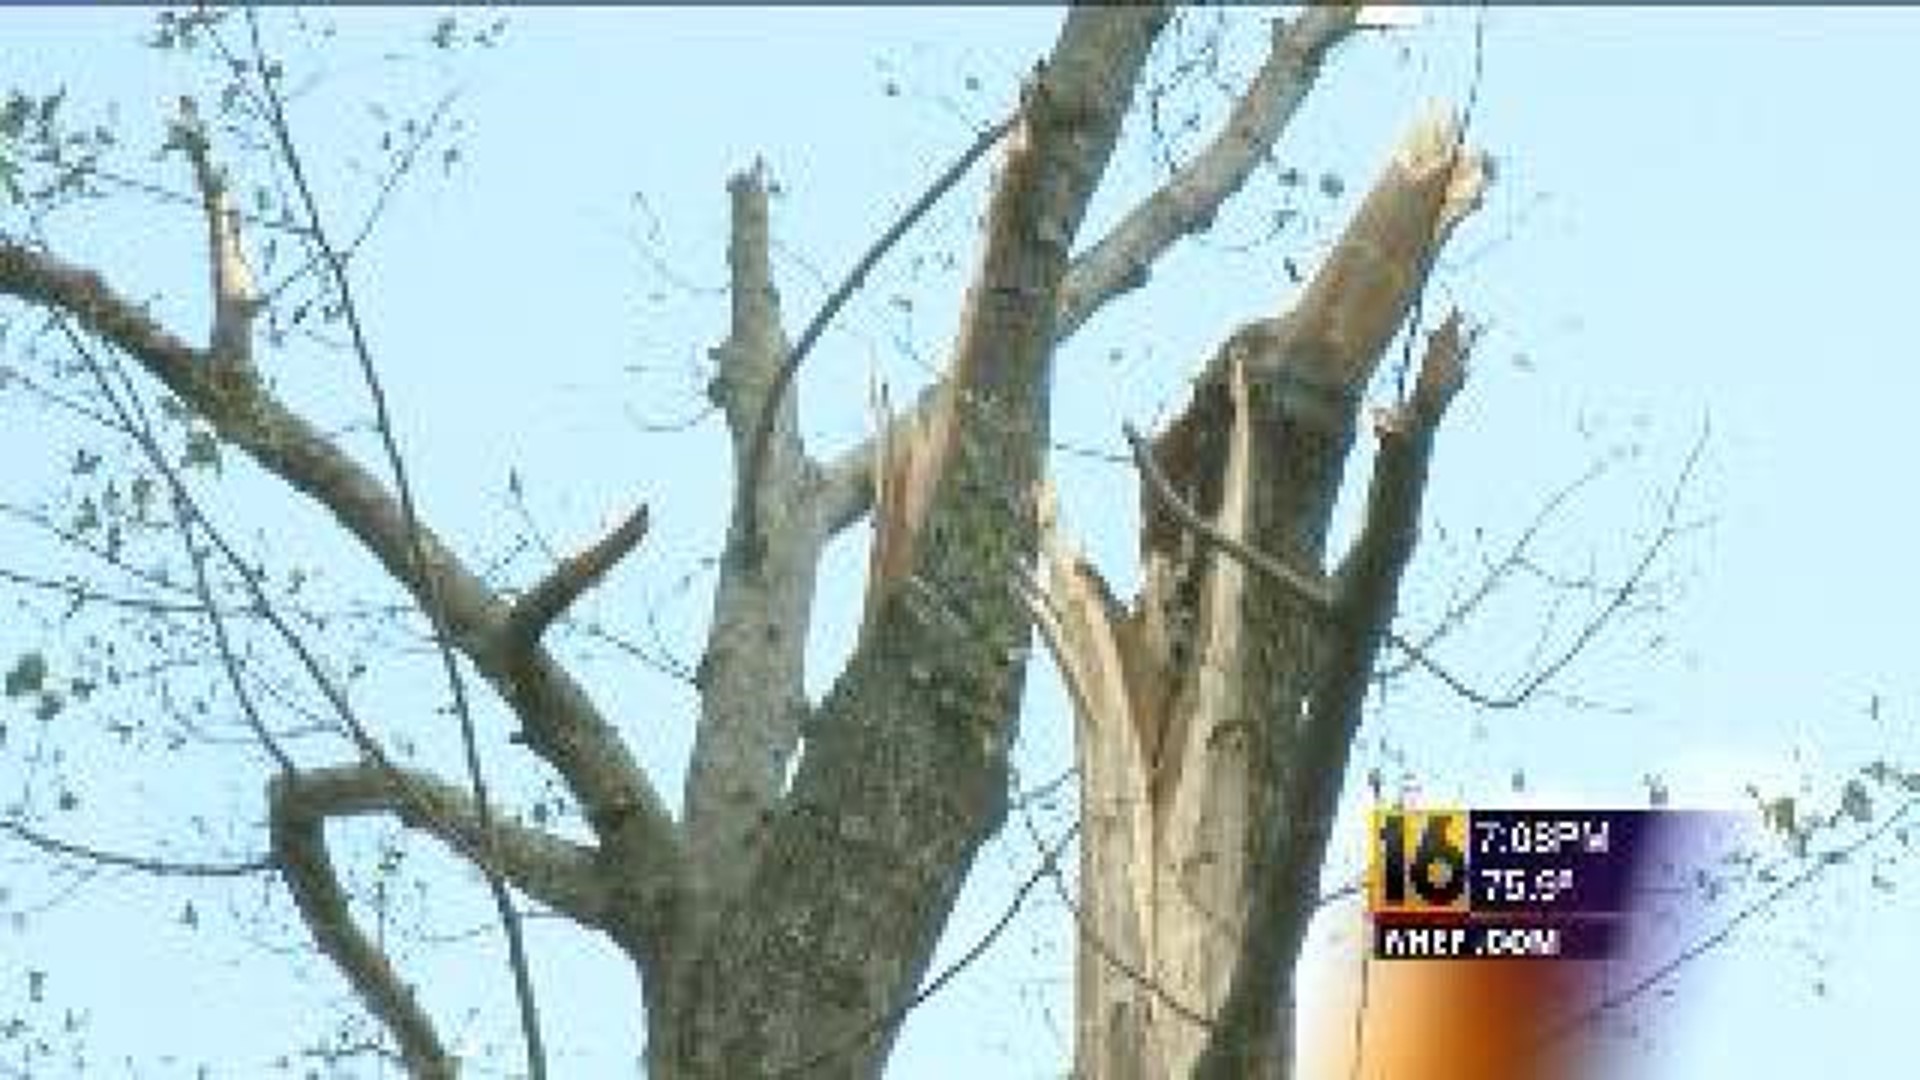 Cleaning Up in Susquehanna County